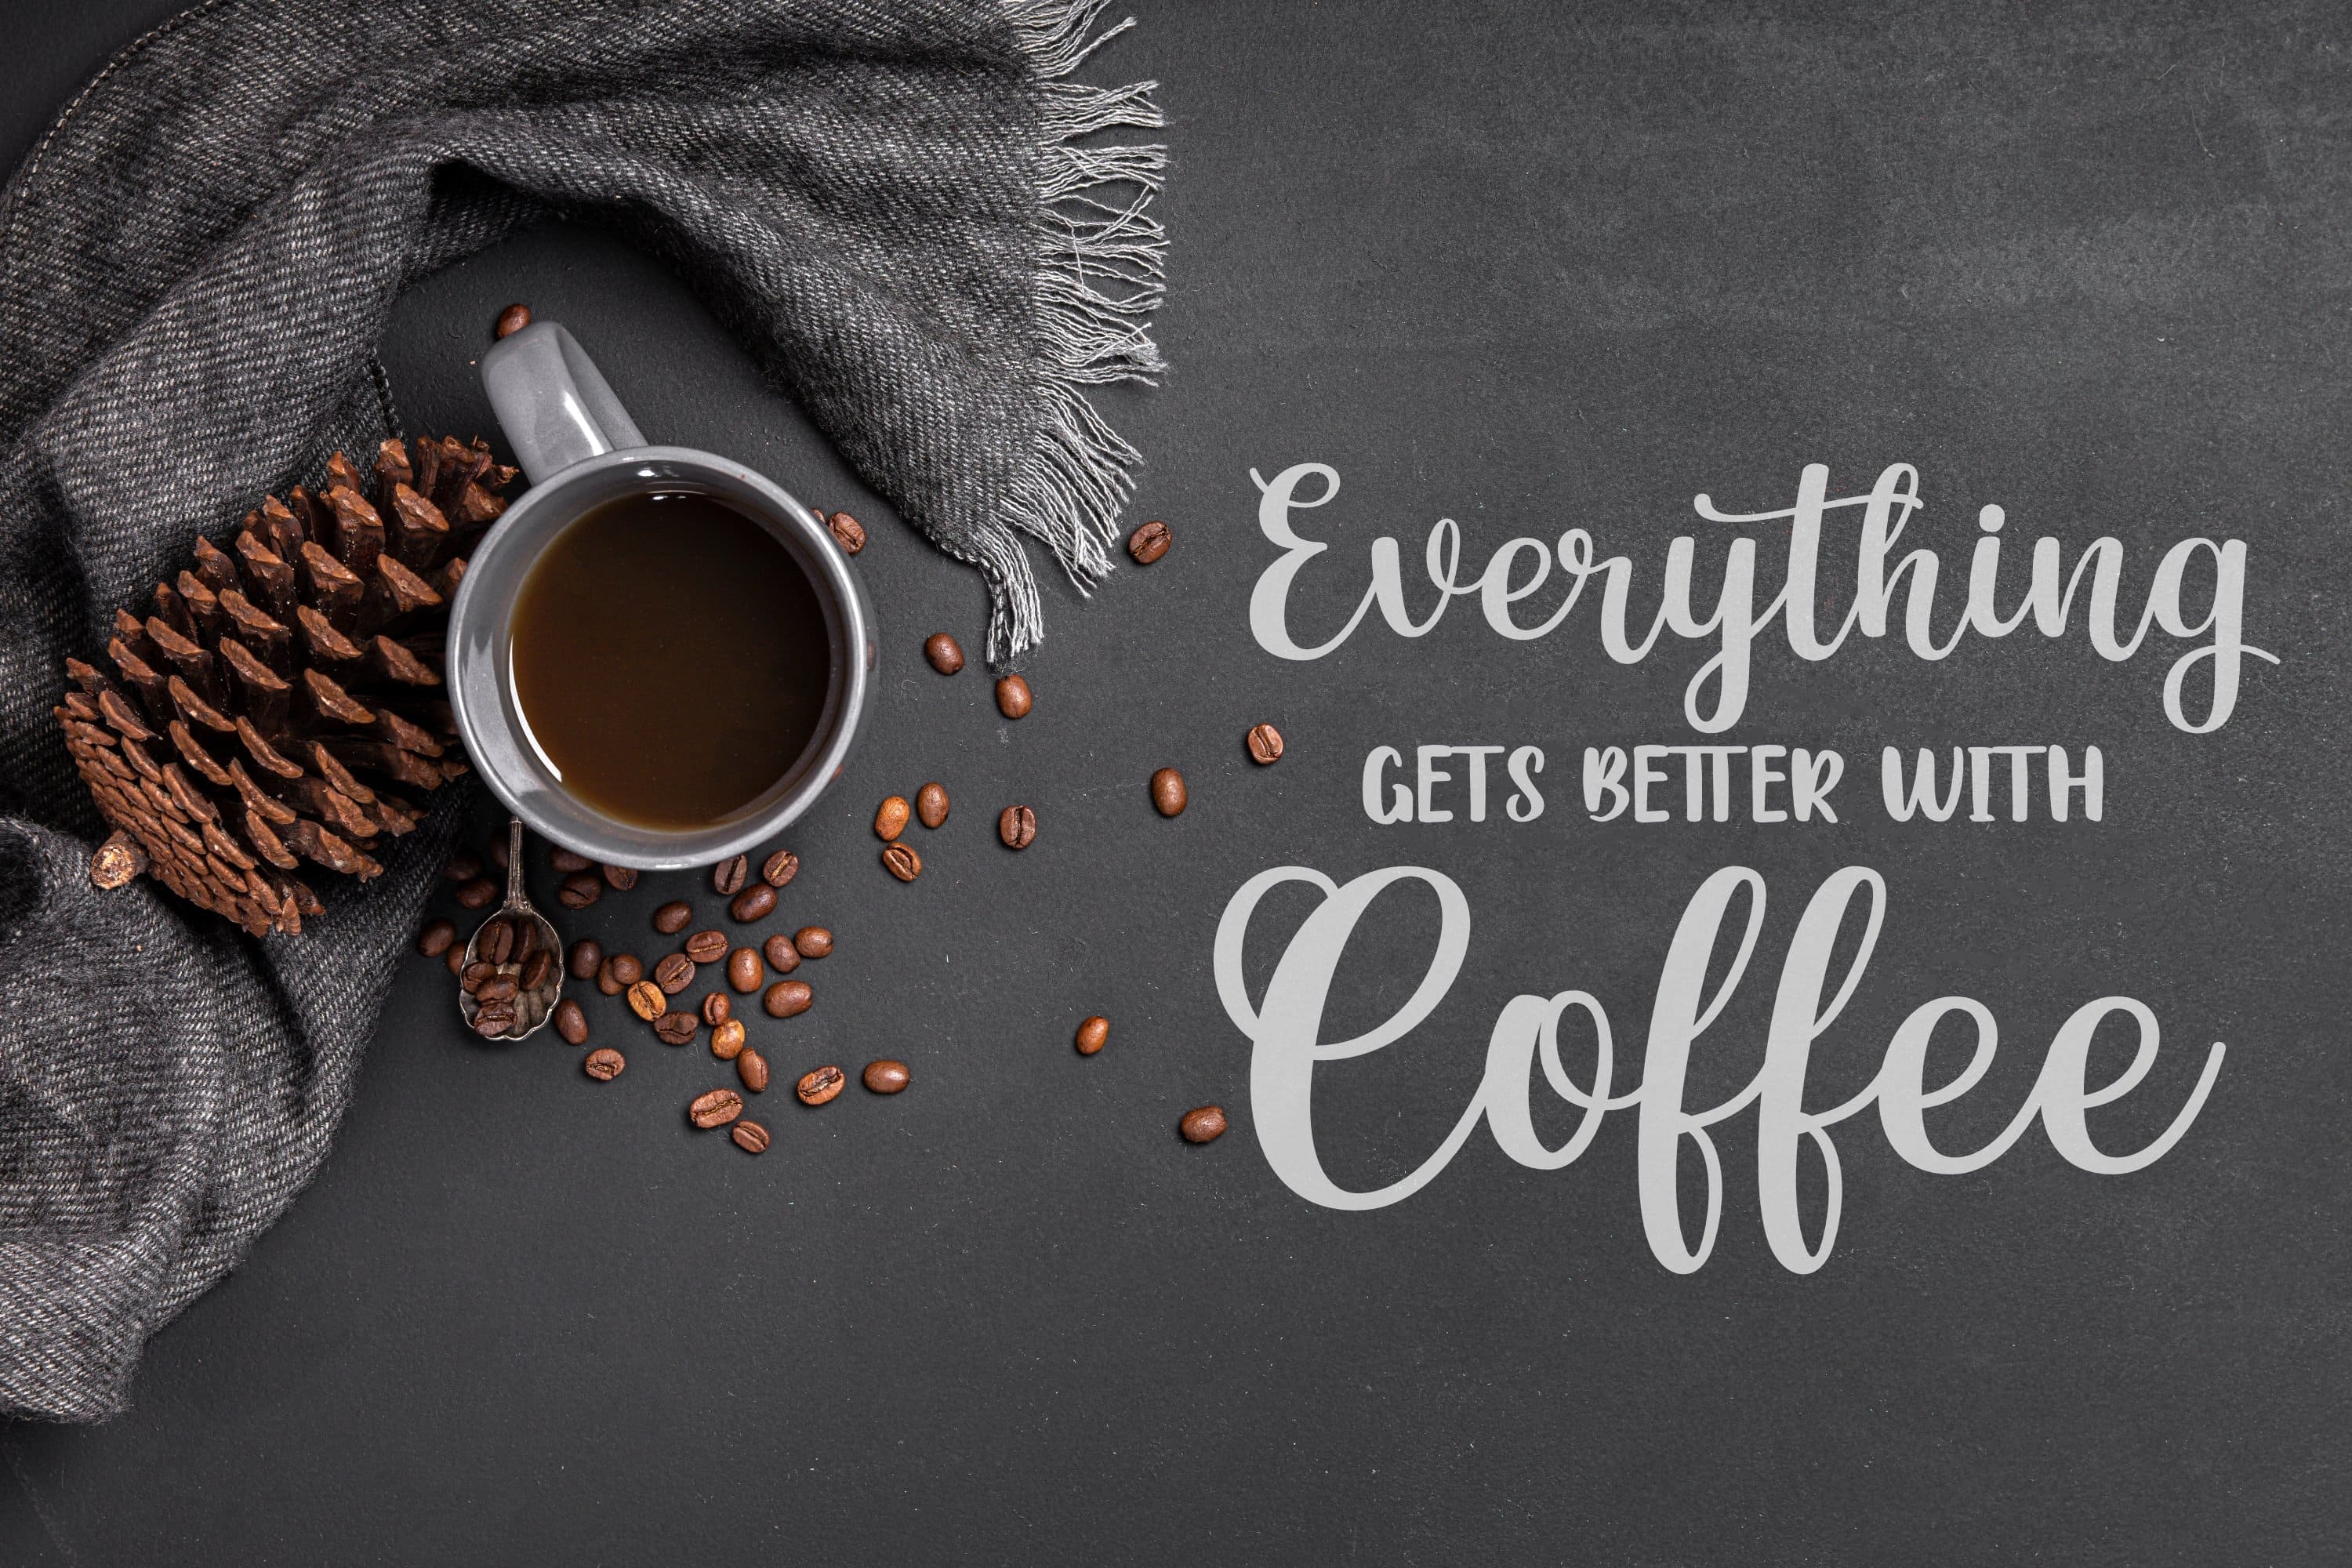 Gray slide with the inscription "Everything gets better with coffee".